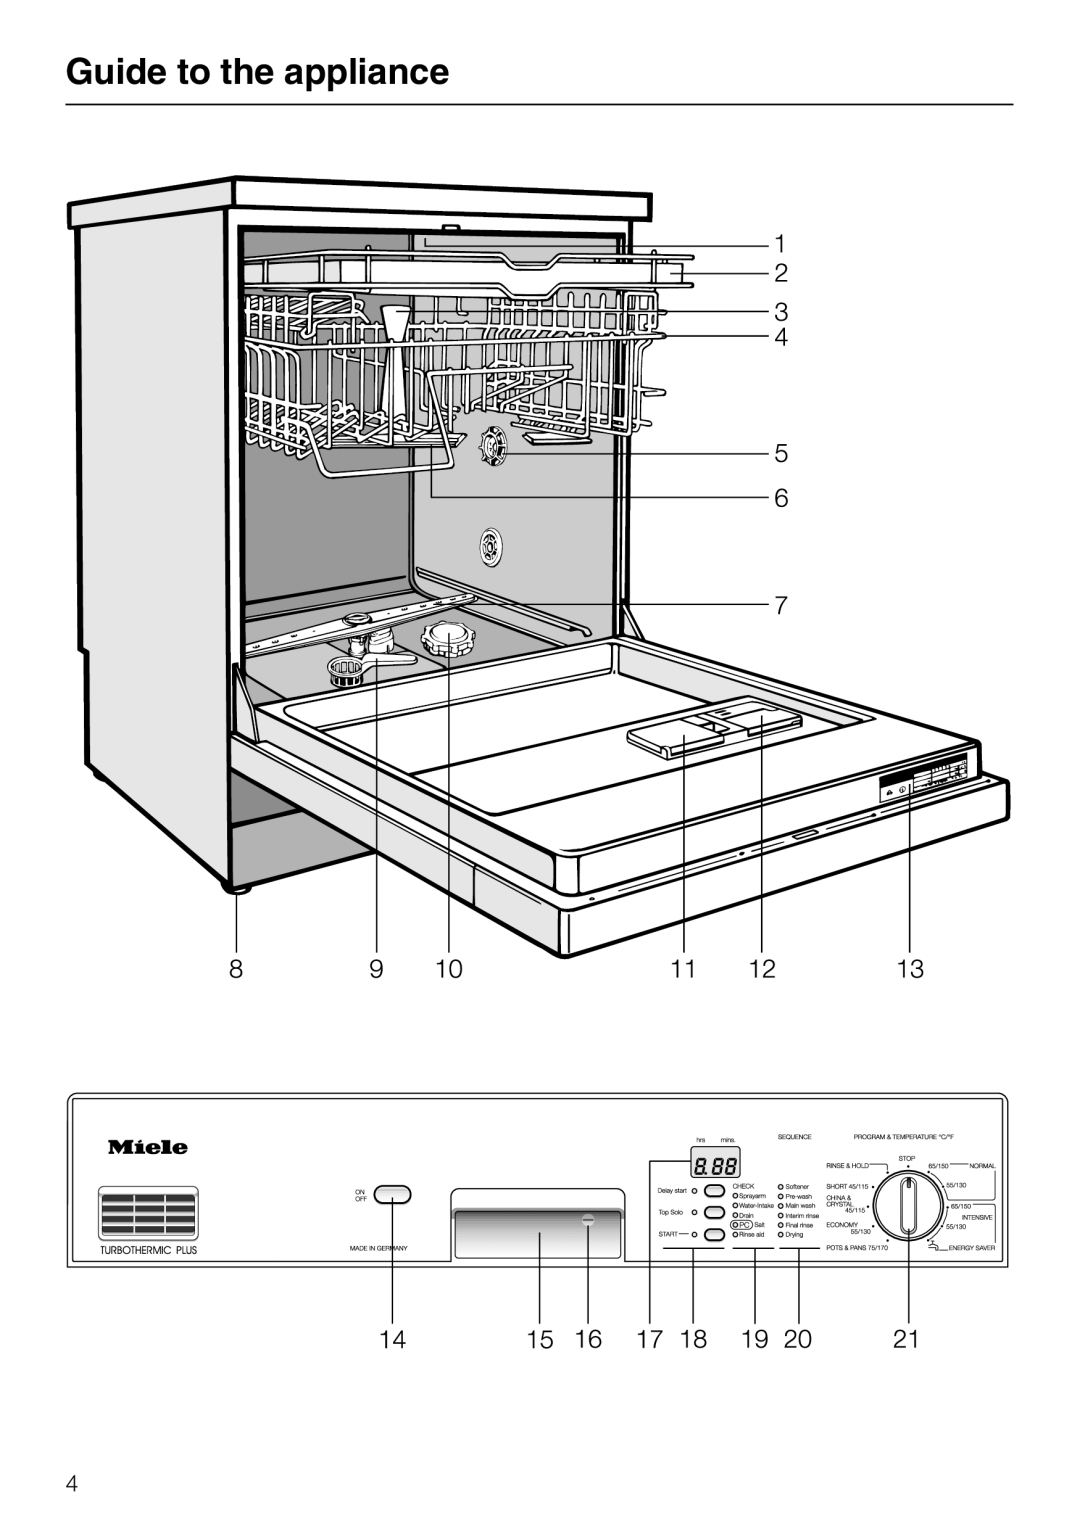 Miele M.-NR. 04 390 922 operating instructions Guide to the appliance 